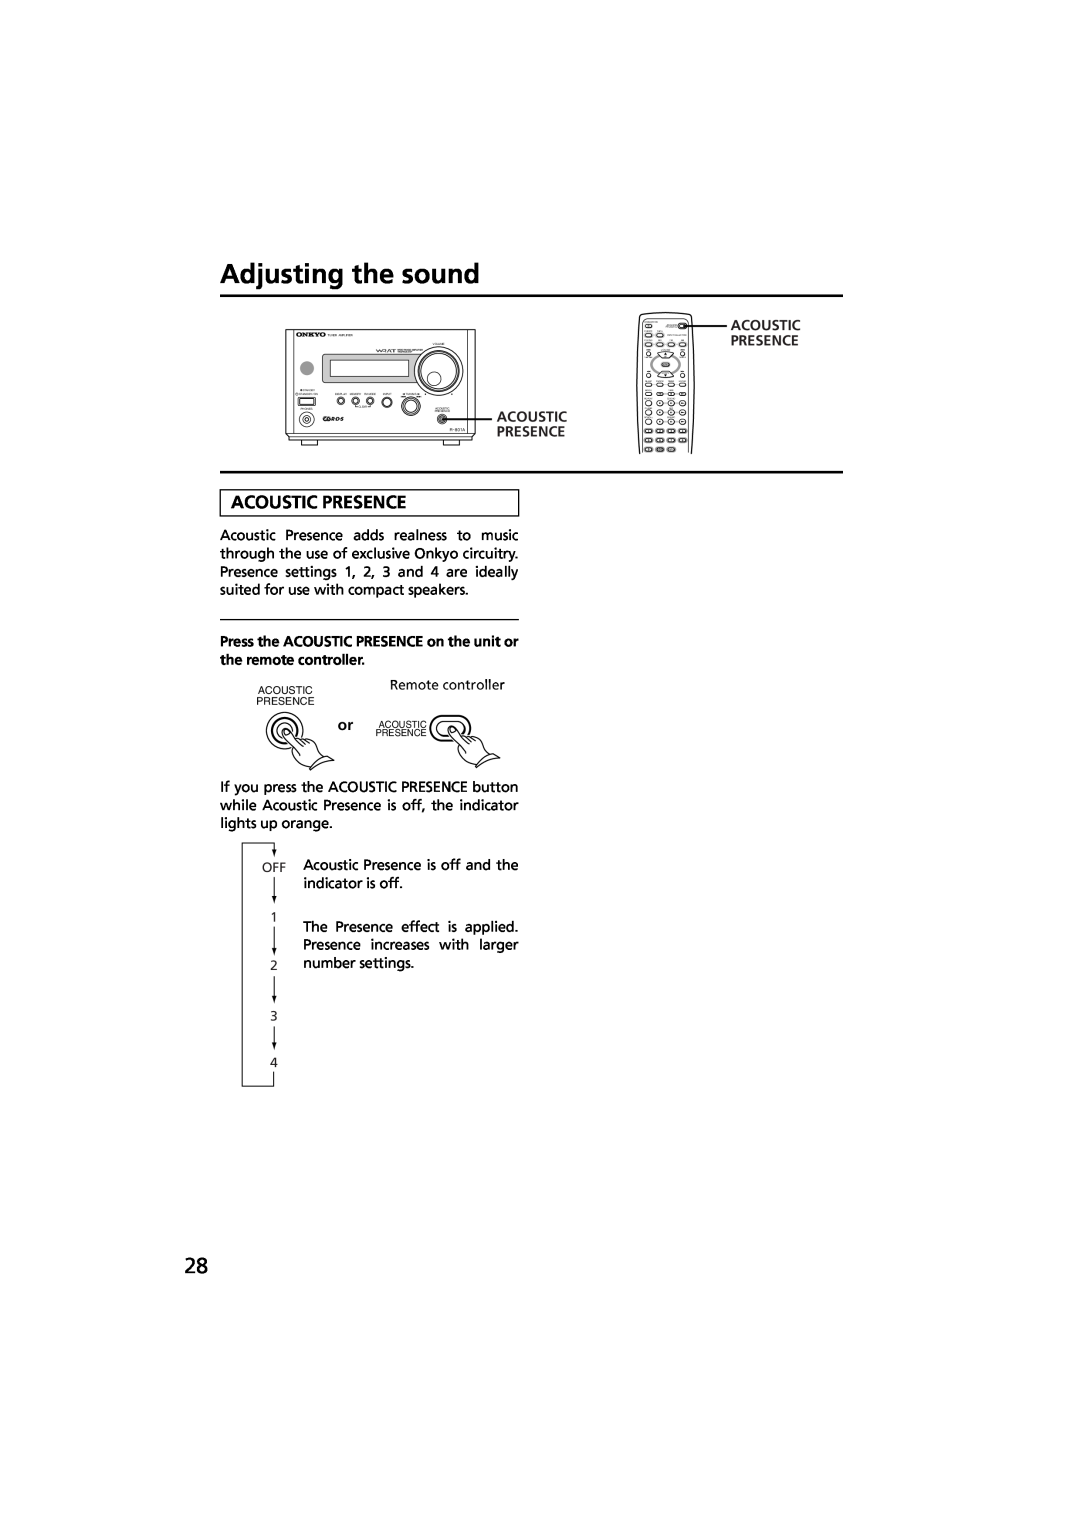 Onkyo R-801A instruction manual Adjusting the sound, Acoustic Presence 